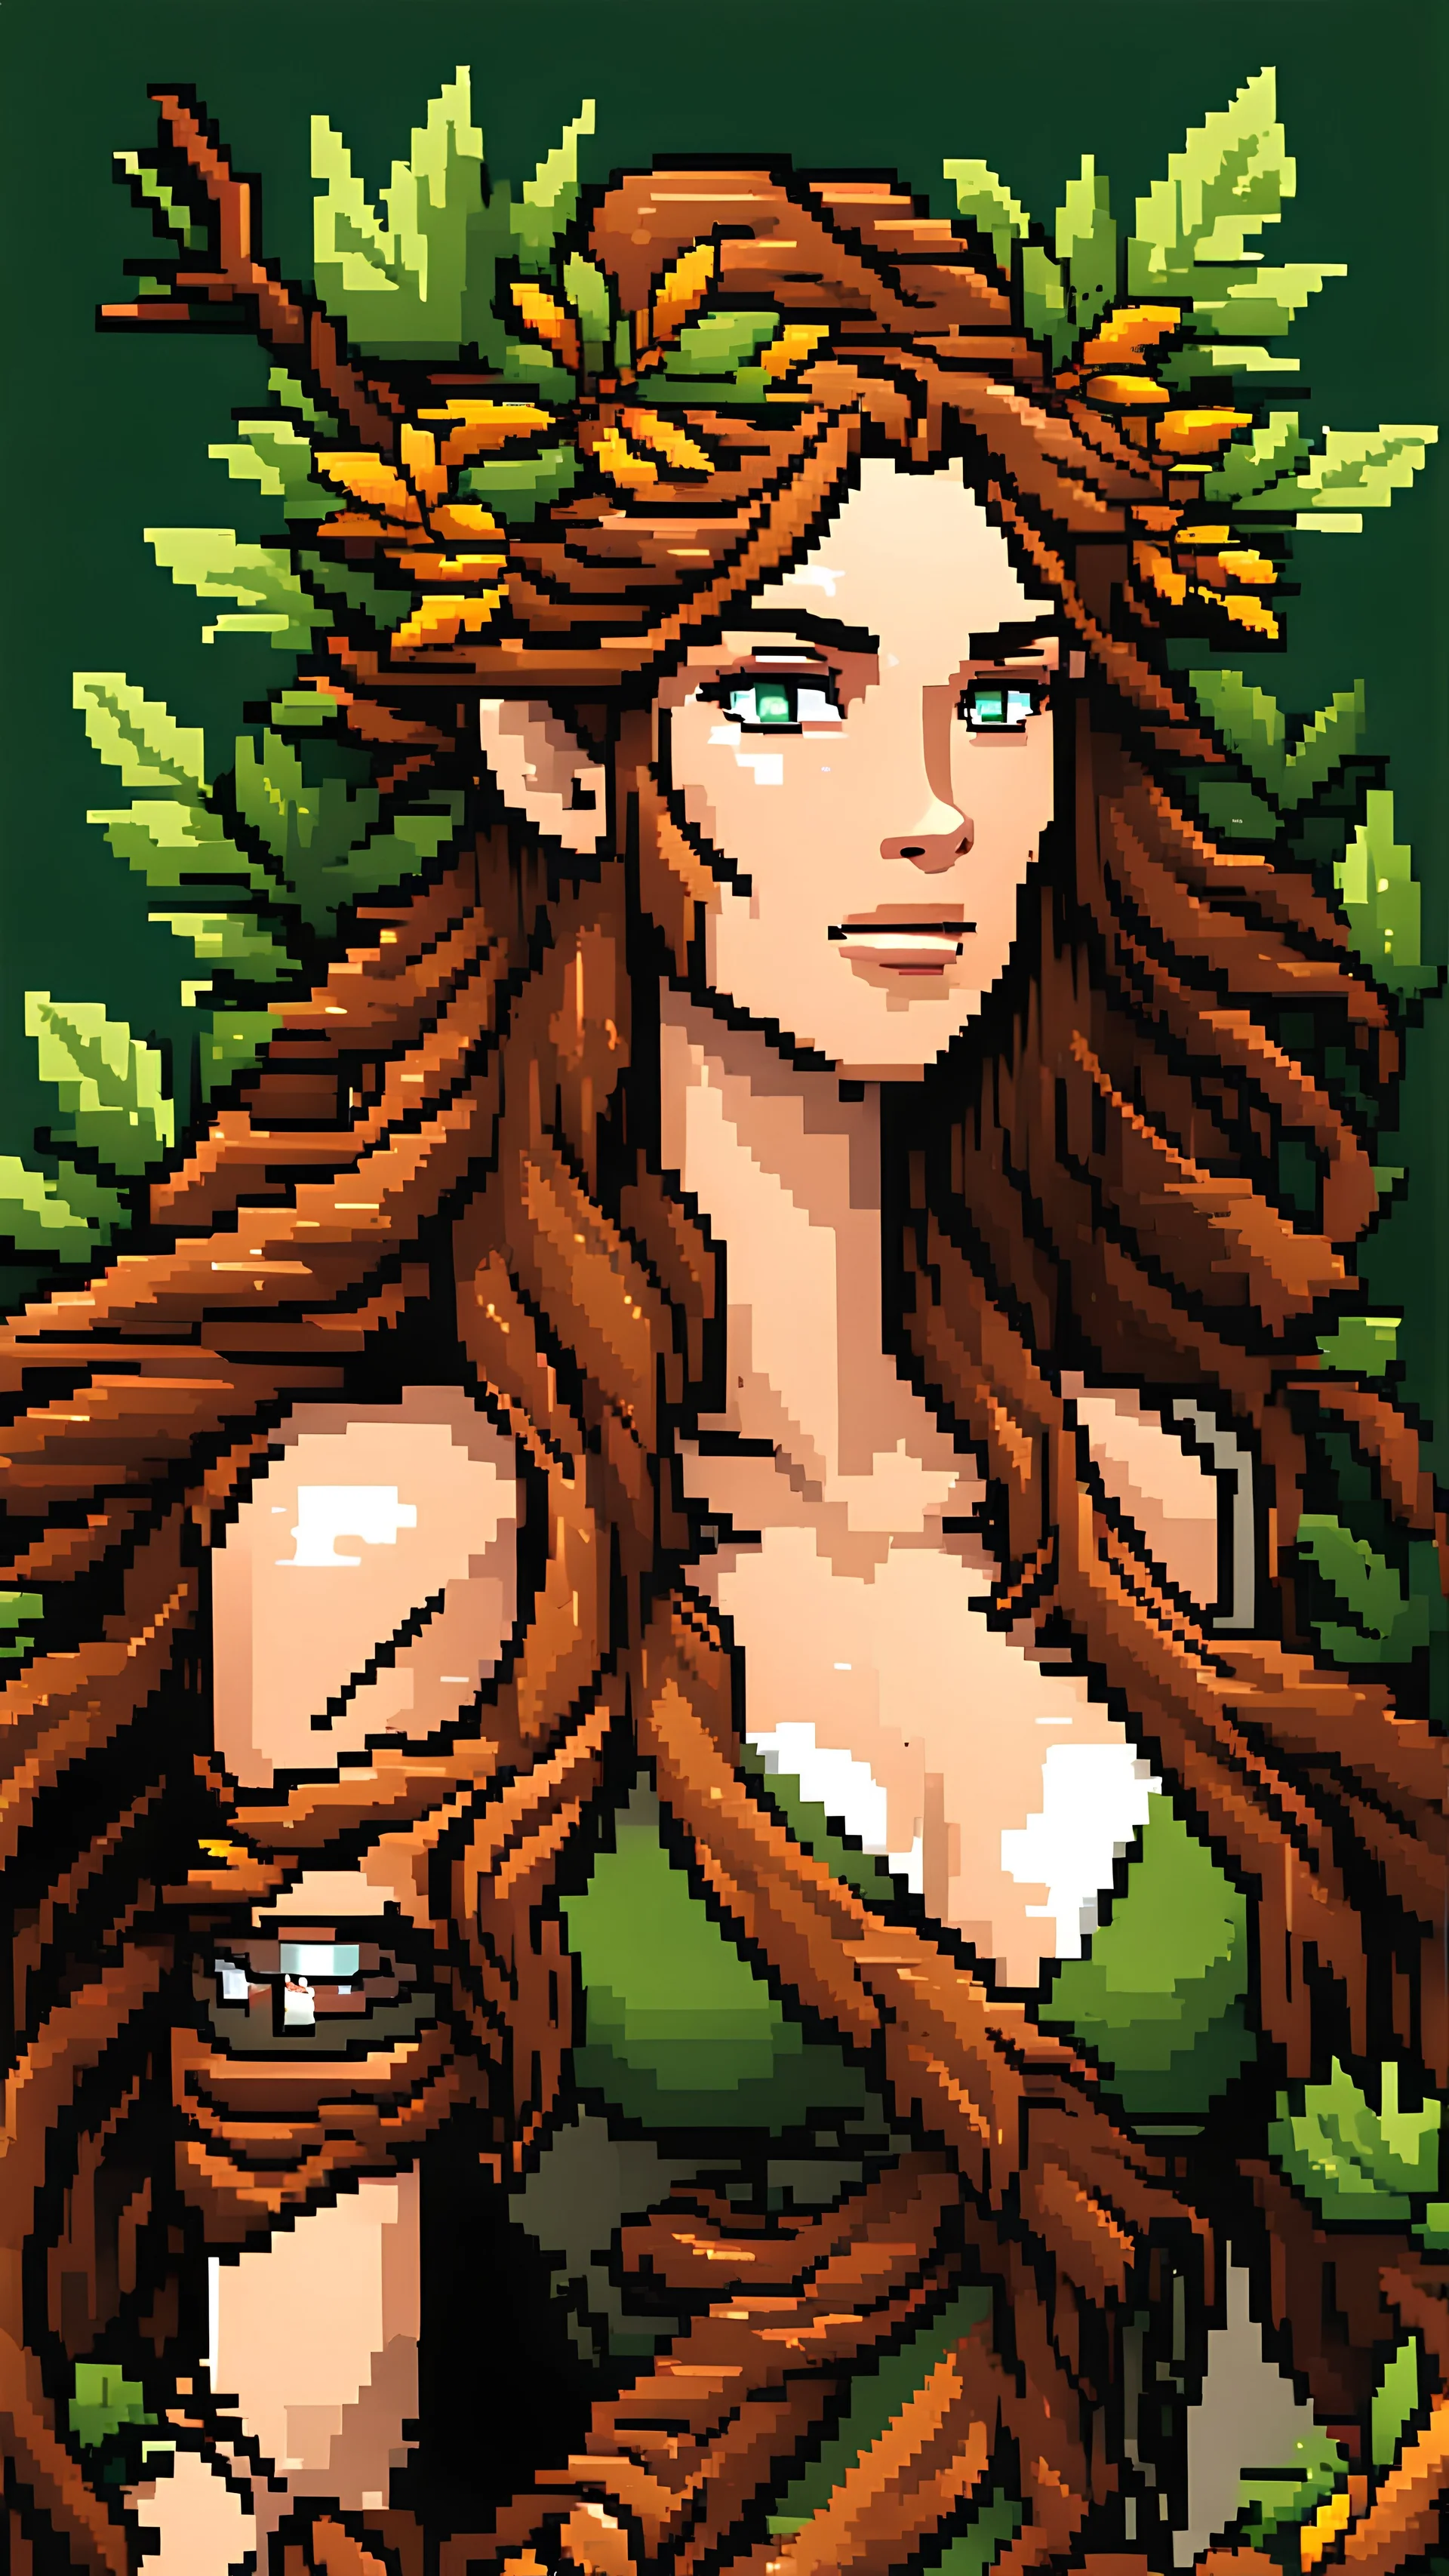 Pixel art sprite of female druid covered in leaves and branches. Long brown hair, green eyes